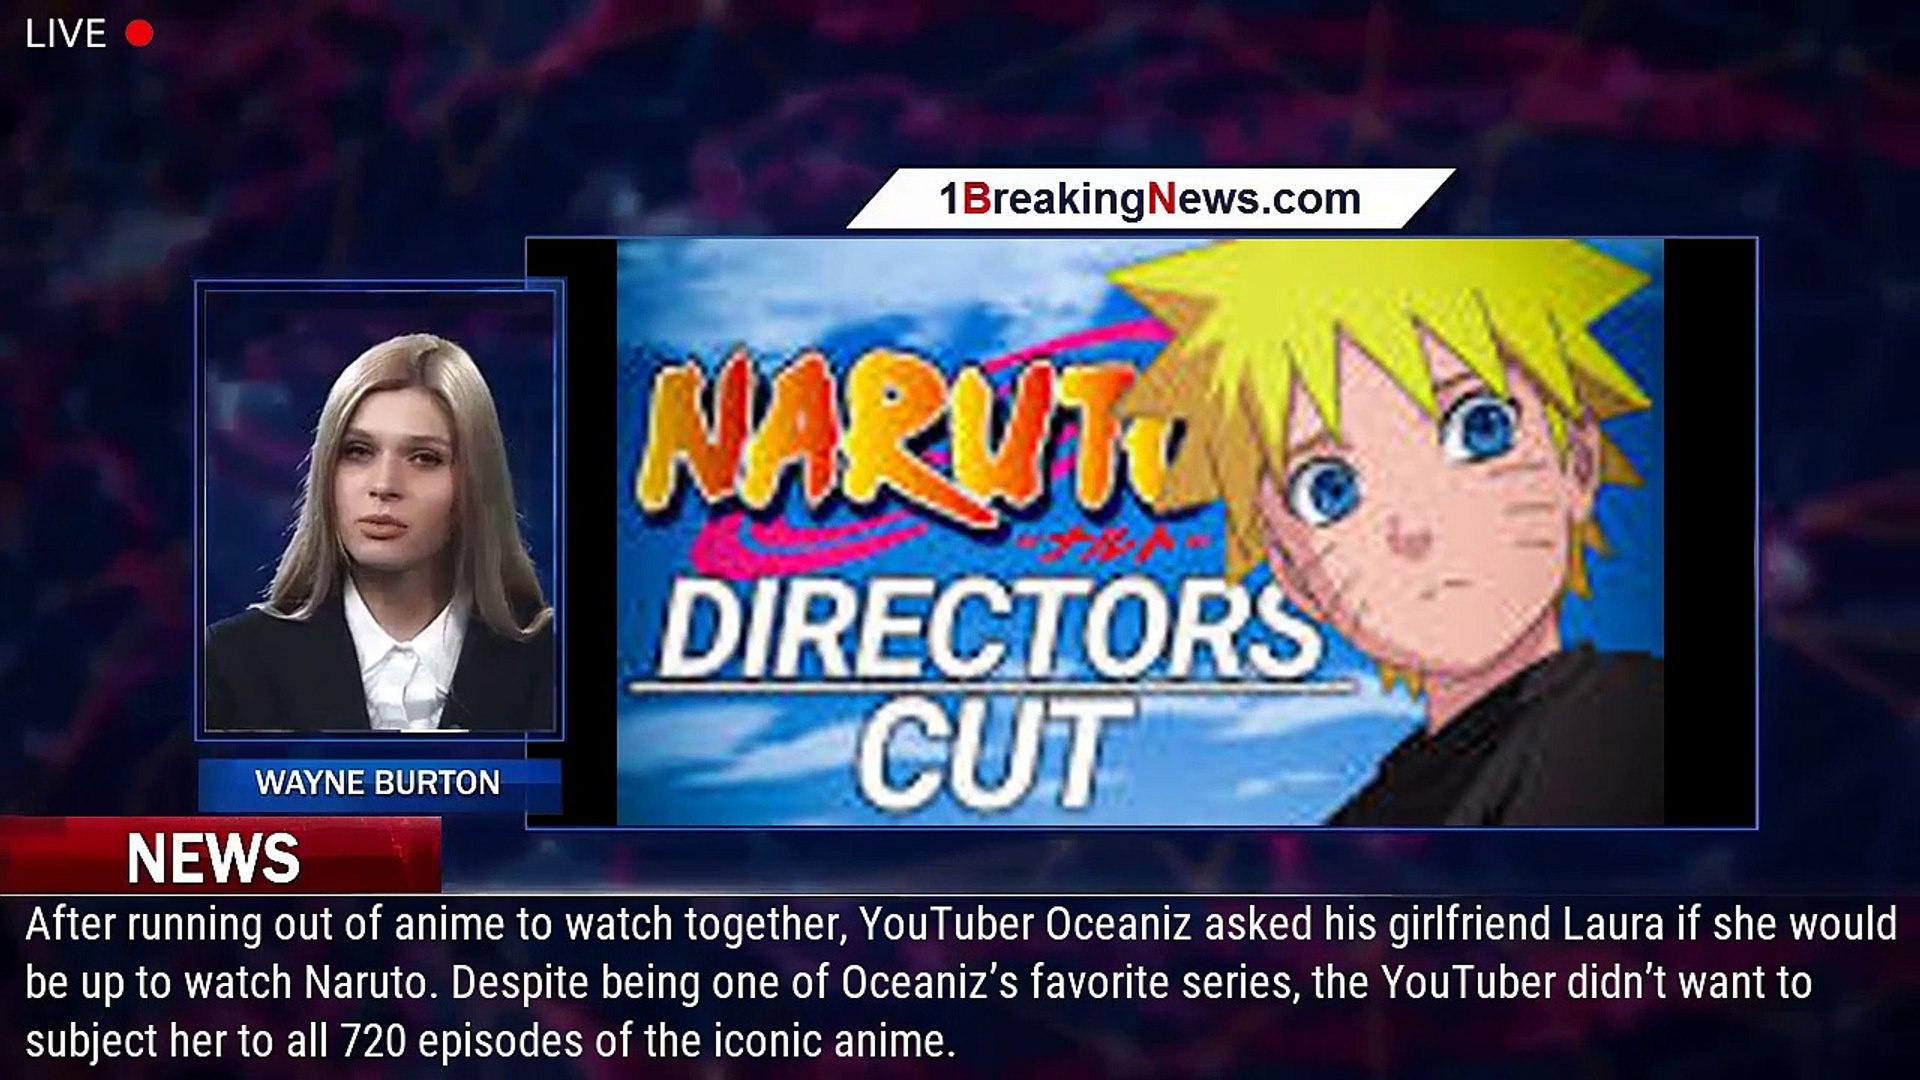 r Cuts Whopping 115 Hours Of Naruto Anime Filler For GF